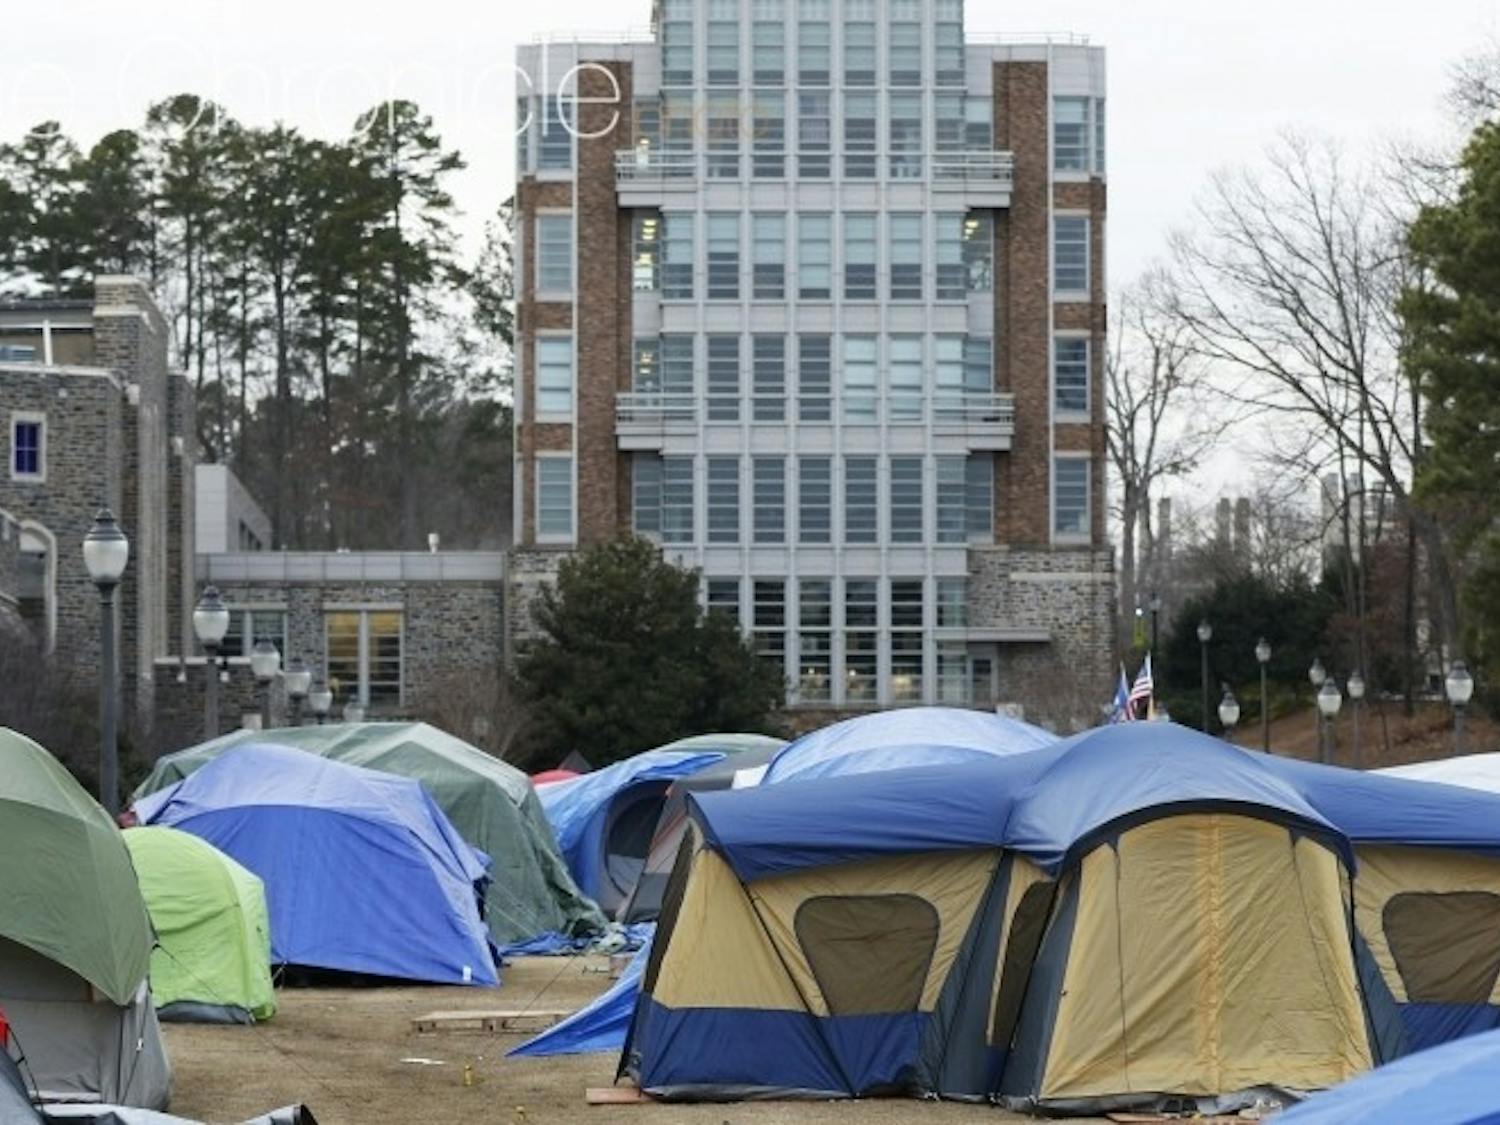 Krzyzewskiville is at full capacity for tenting with the North Carolina game just eight days away.&nbsp;